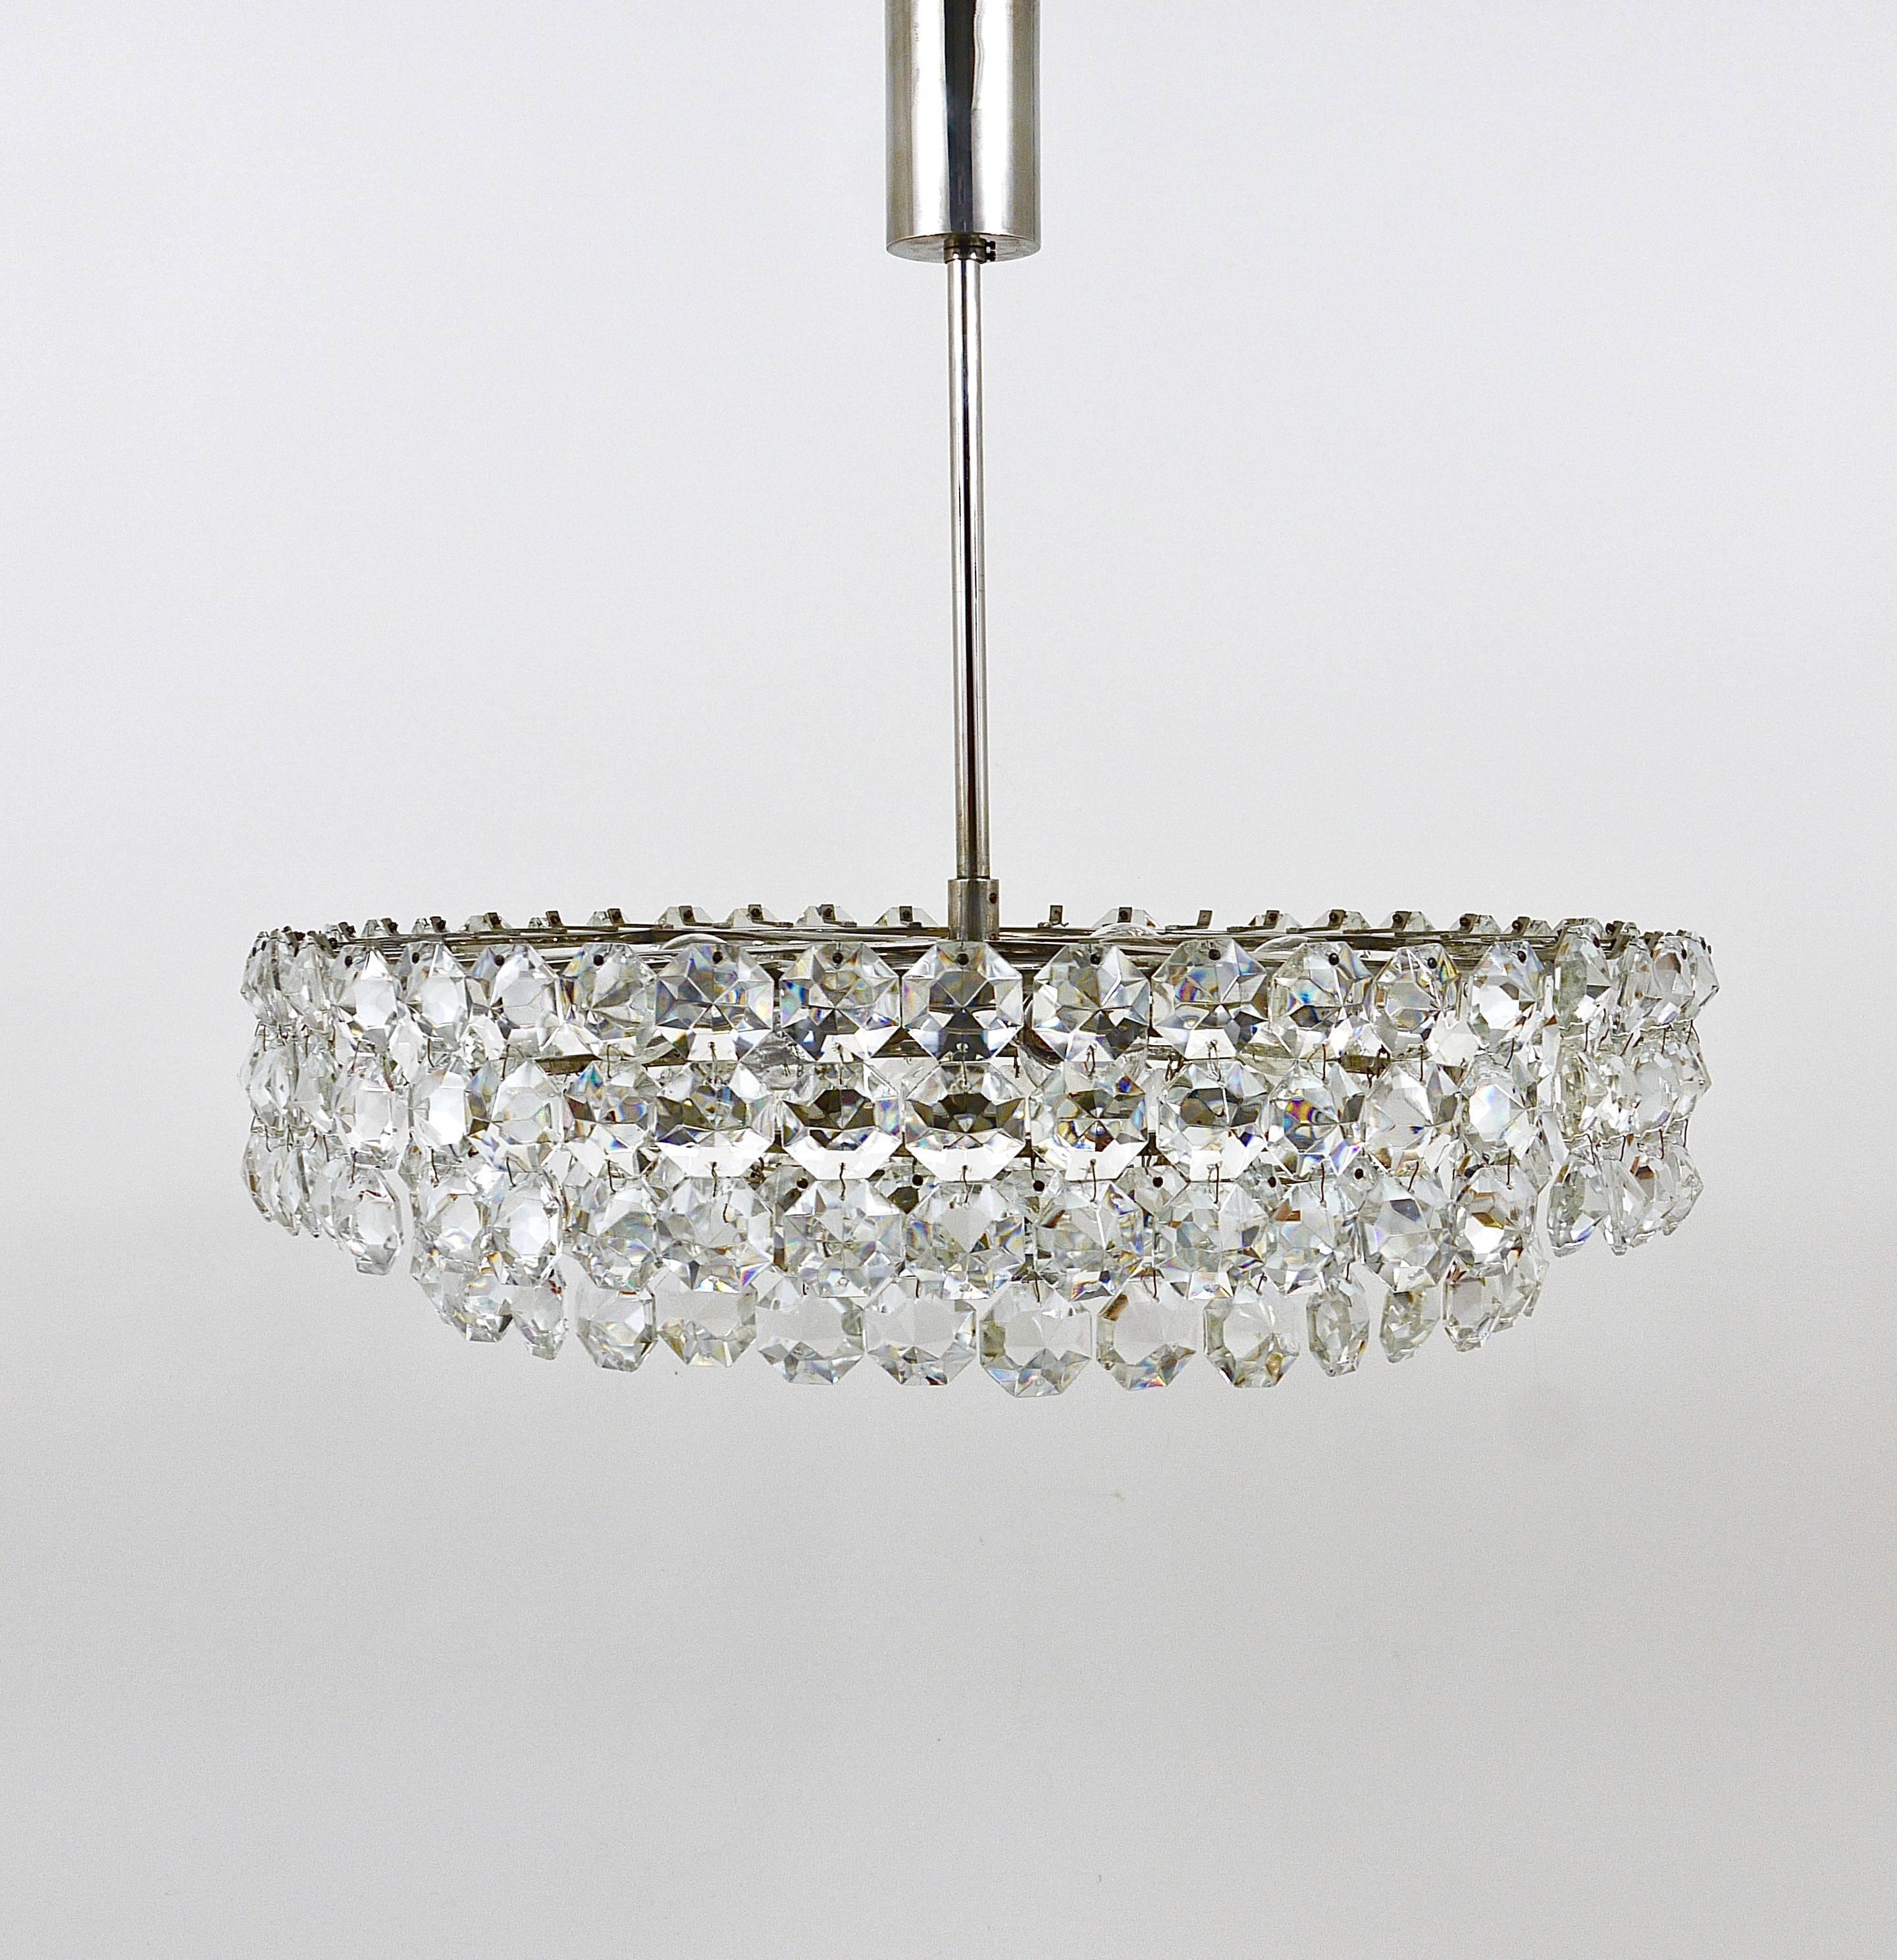 A beautiful, large nickel-plated brass crystal chandelier from the 1960s, manufactured by Bakalowits and Sohne, Vienna, Austria. The chandelier has a nickel-plated mirror-finished disc in the center and two tiers, covered by big, octagonal